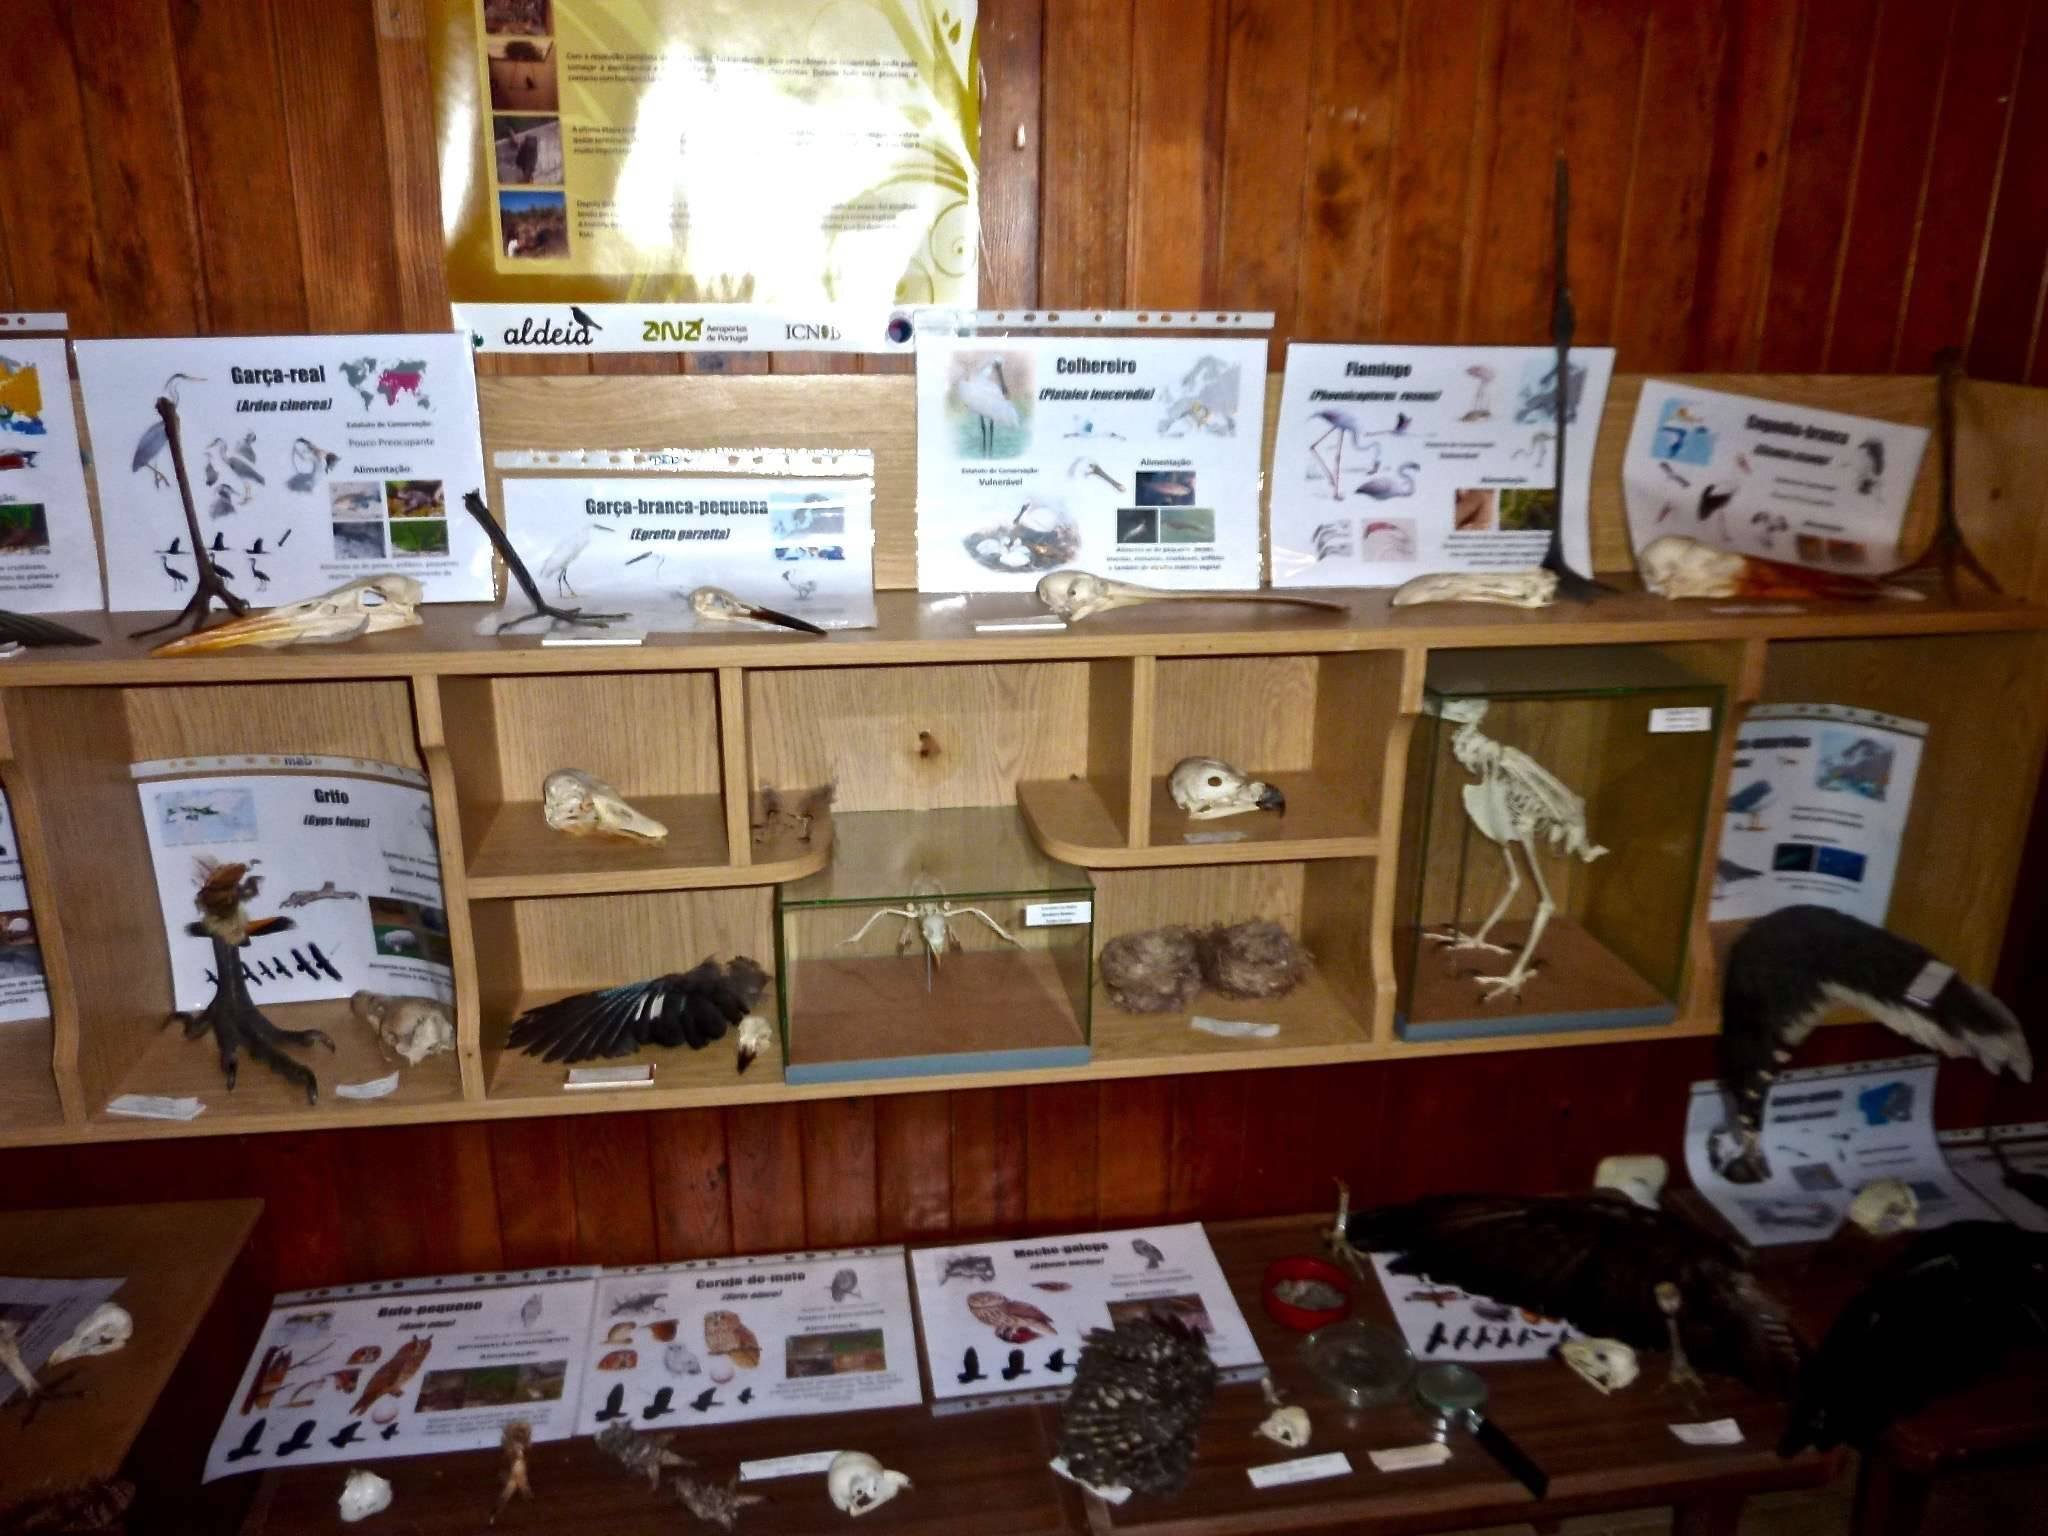 Displays in the Information Centre